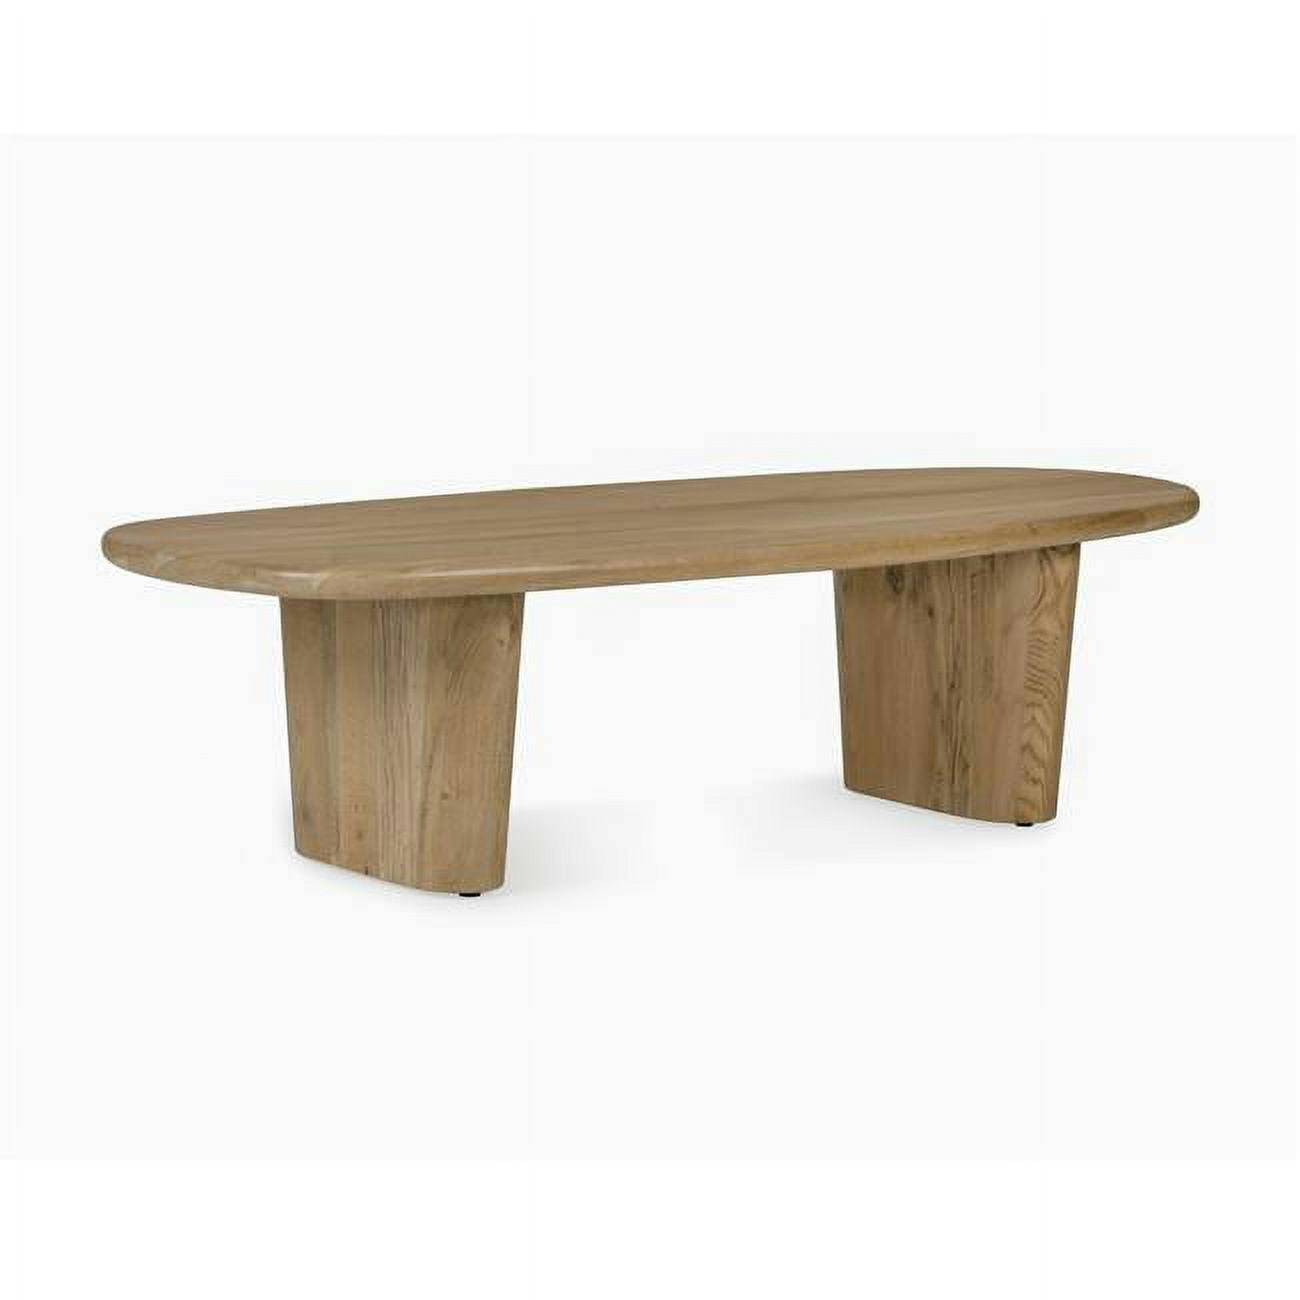 Laurel Round FSC Certified Oak Coffee Table with Natural Oil Finish